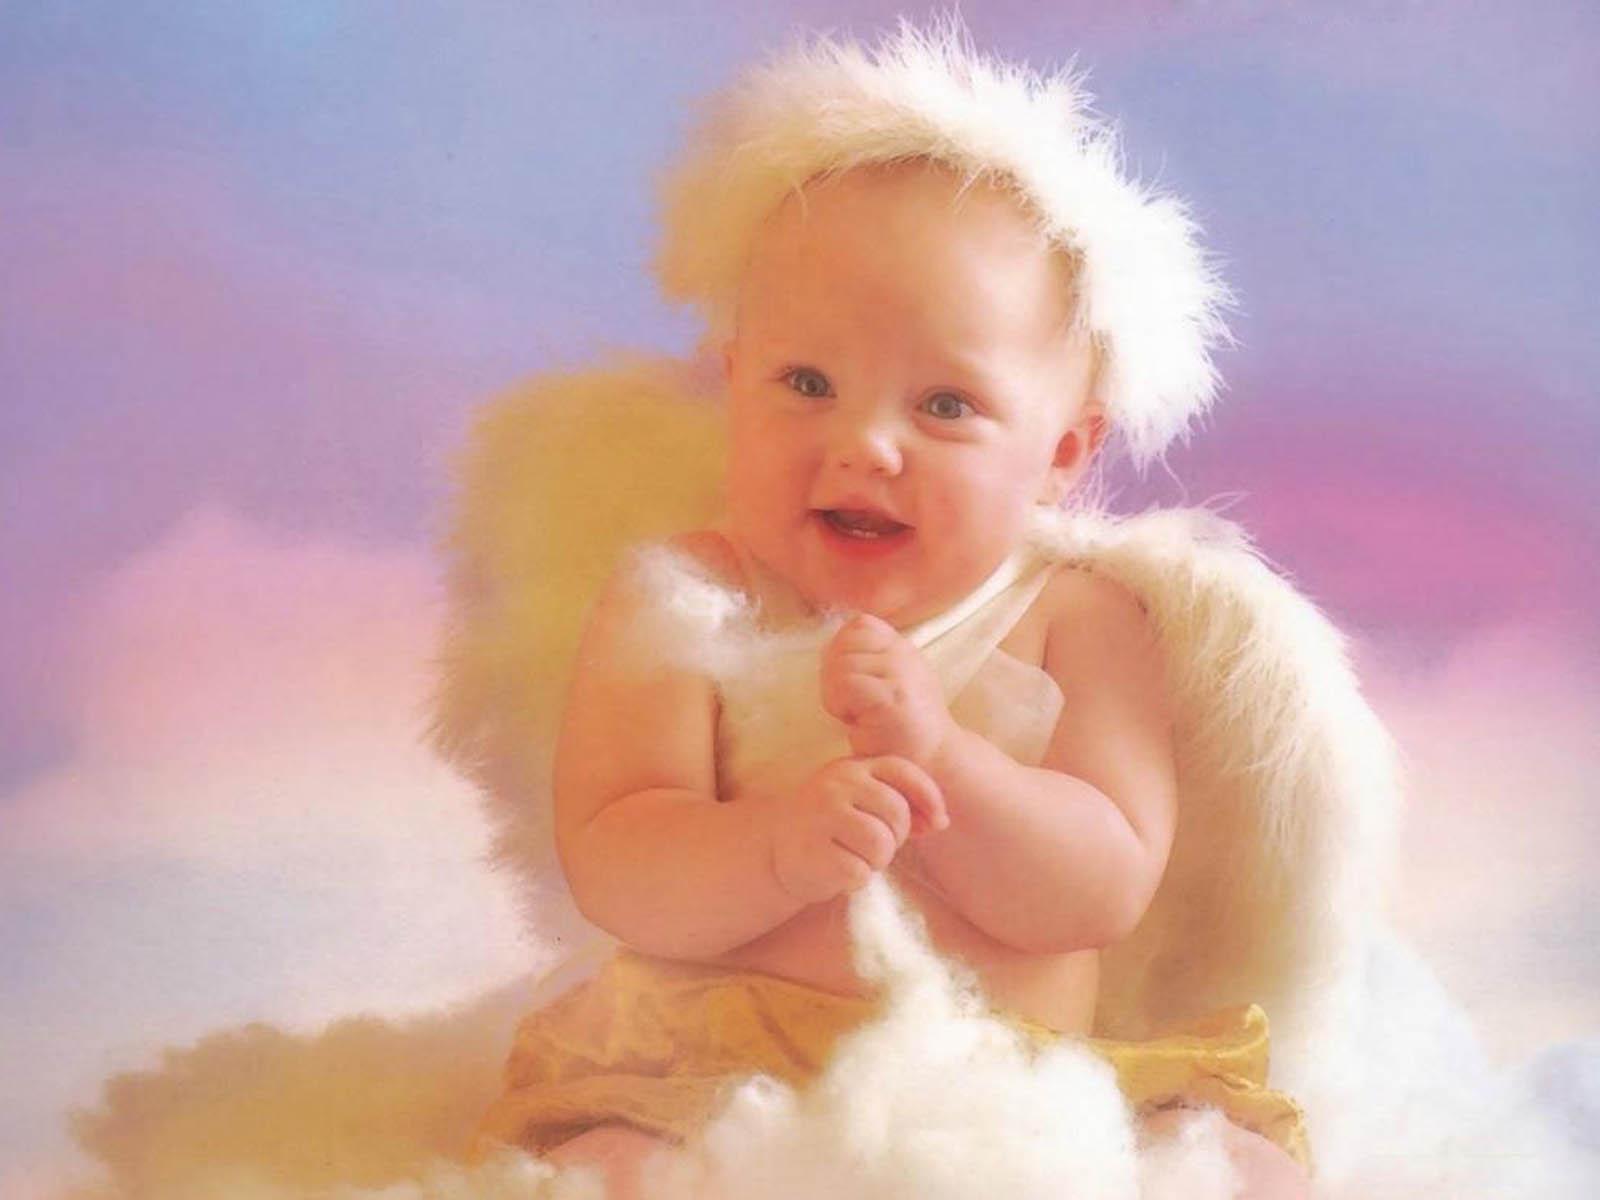 Angel Baby Girls Wallpapers